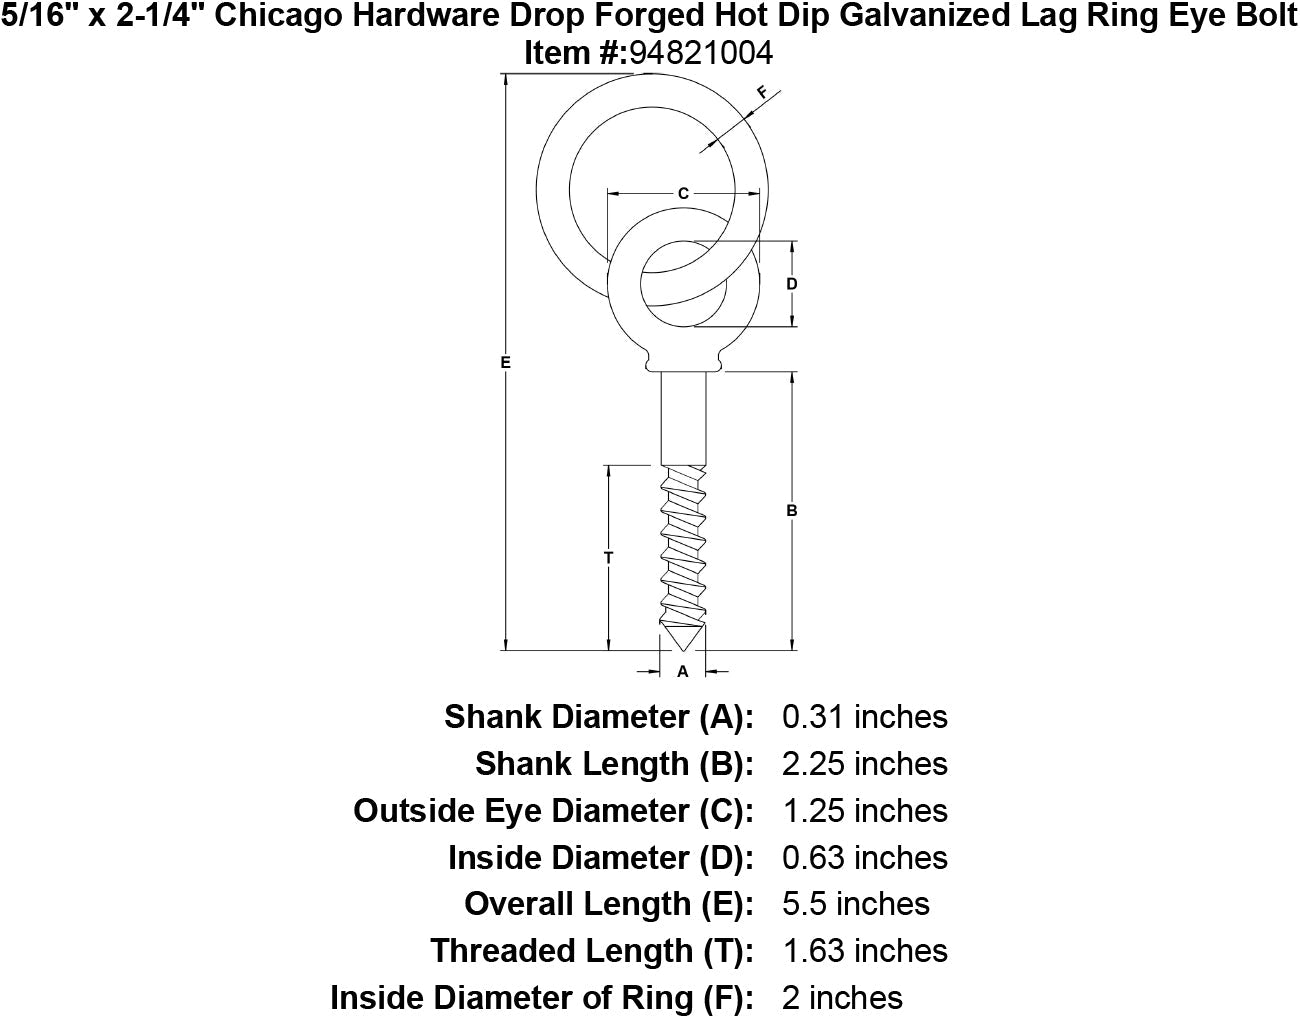 5/16 Chicago Hardware Drop Forged Hot Dip Galvanized Eye Nut with 1/4 Bail